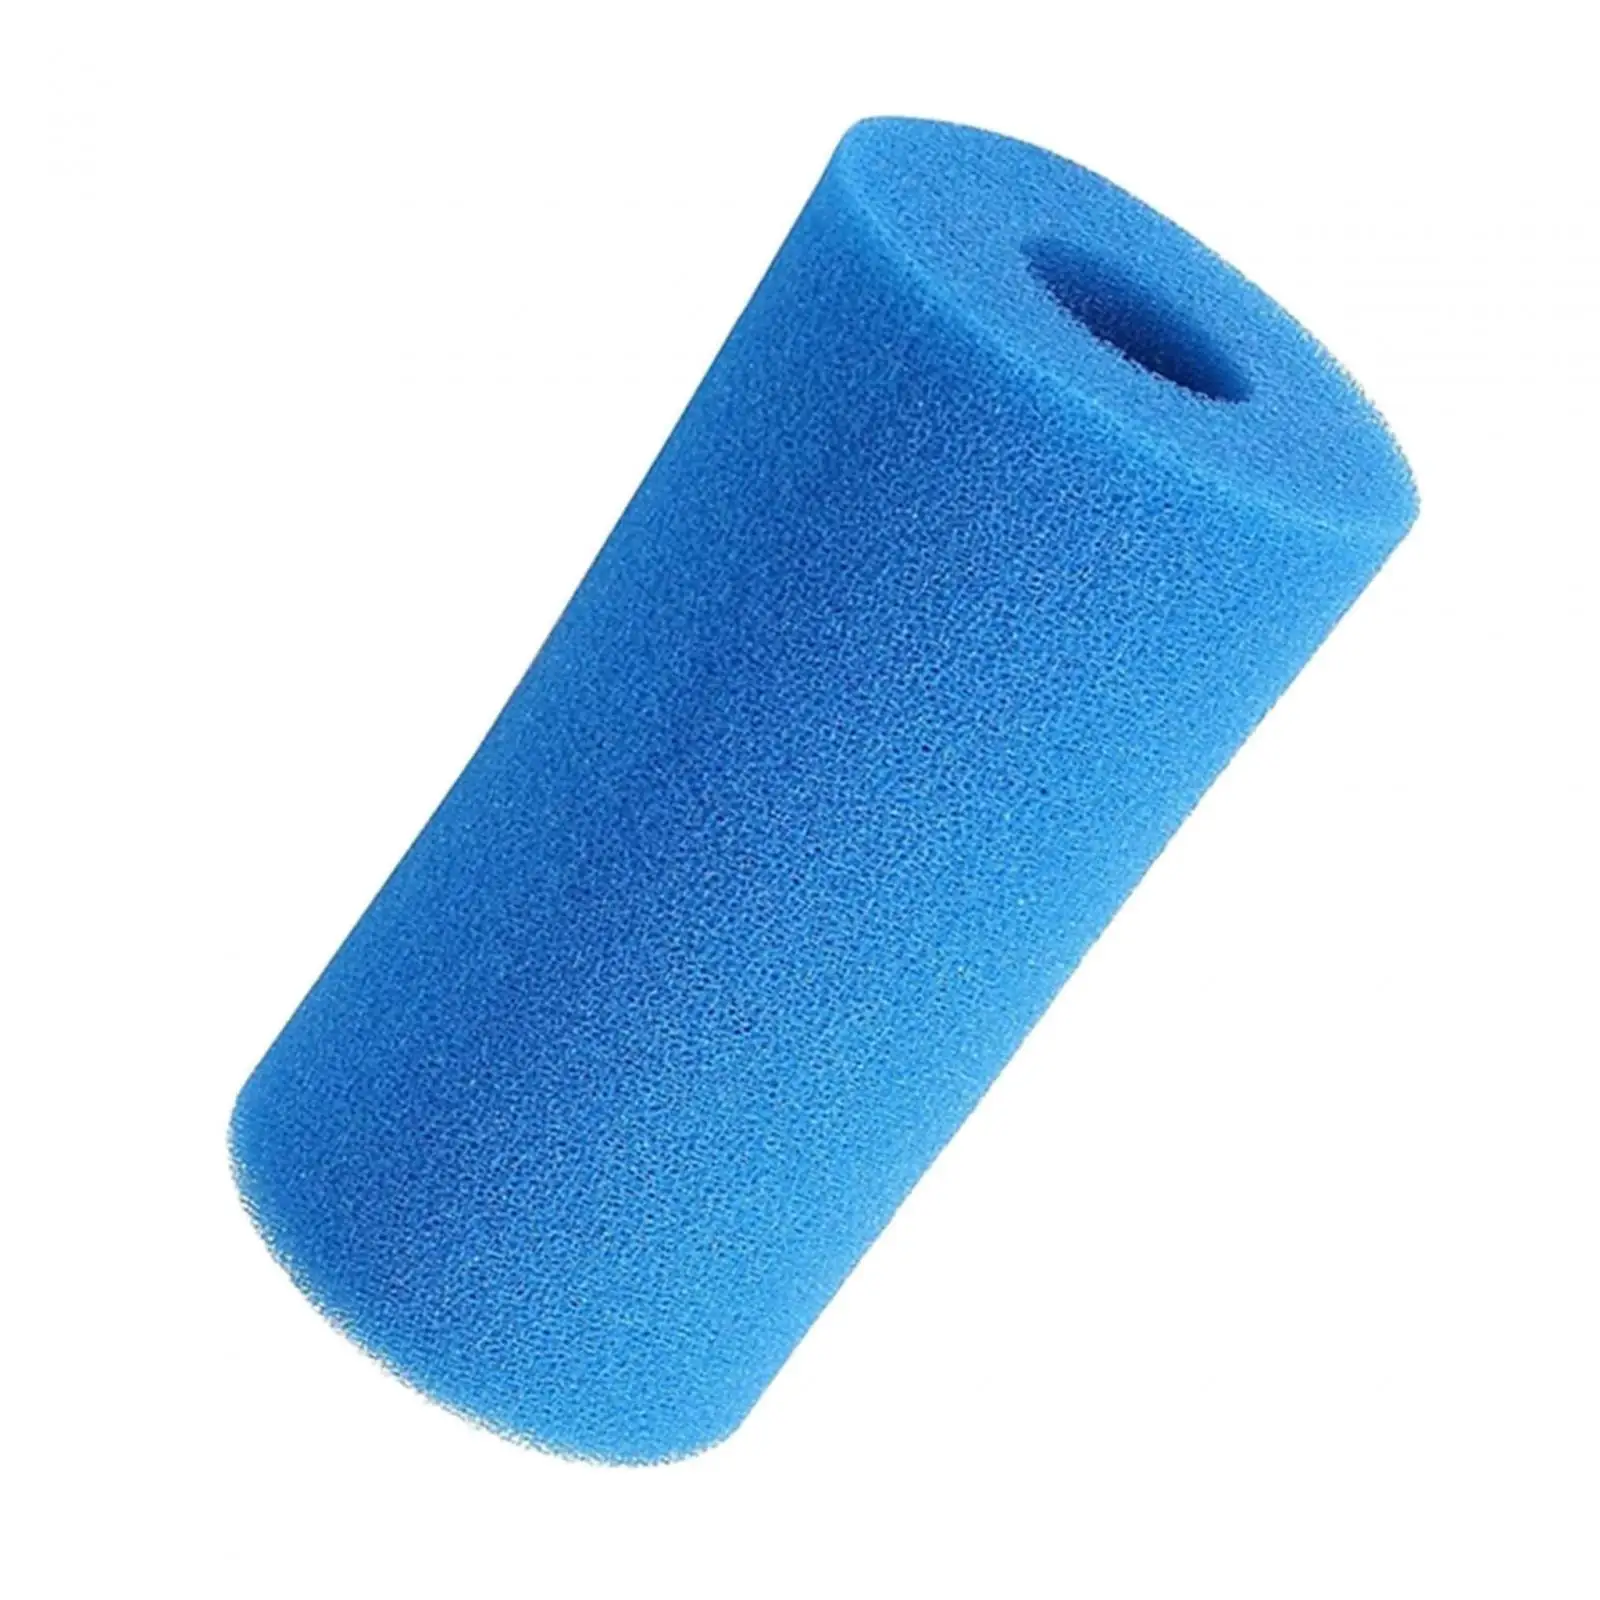 Pool Filter Cartridge, Pool Sponge Filter Easy to Use, Easy to Clean, Replace Filter Pump Cartridge for Type B Accessories